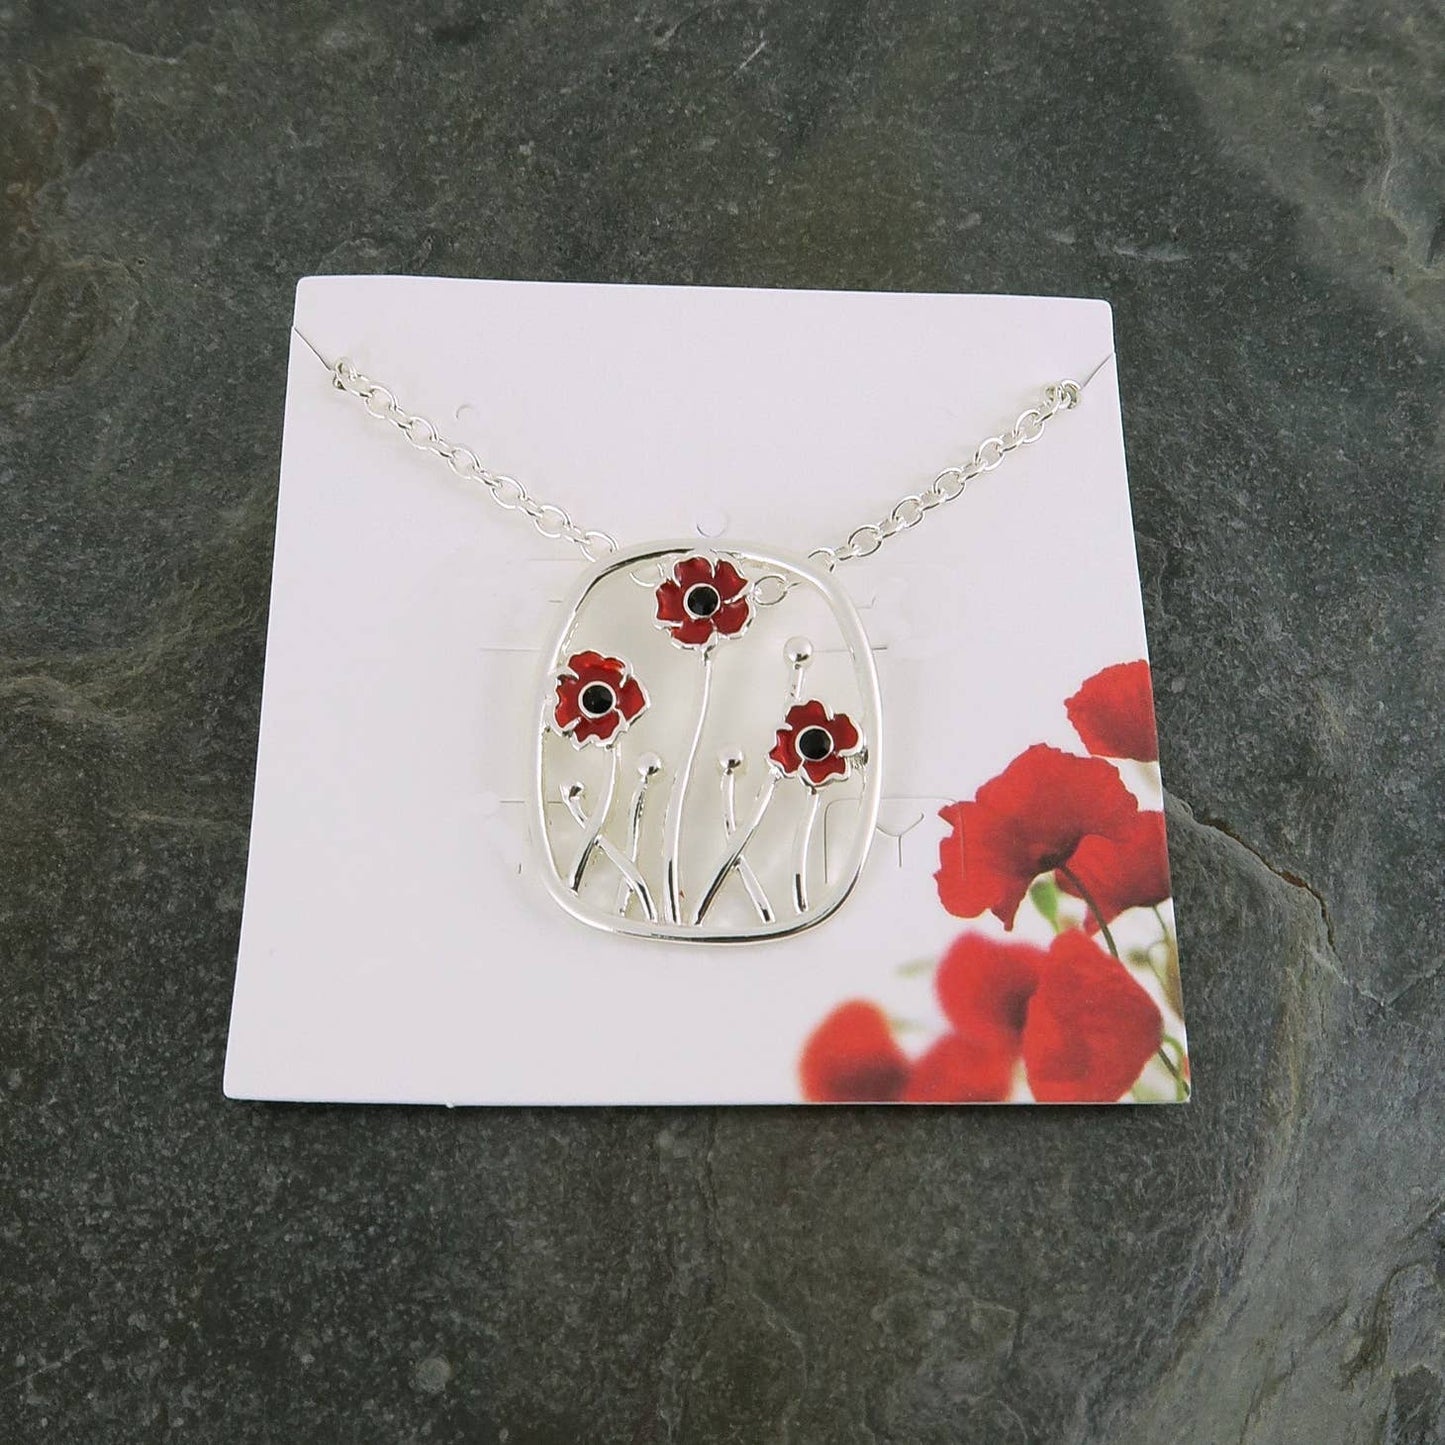 Three Red Flowers Pendant Necklace